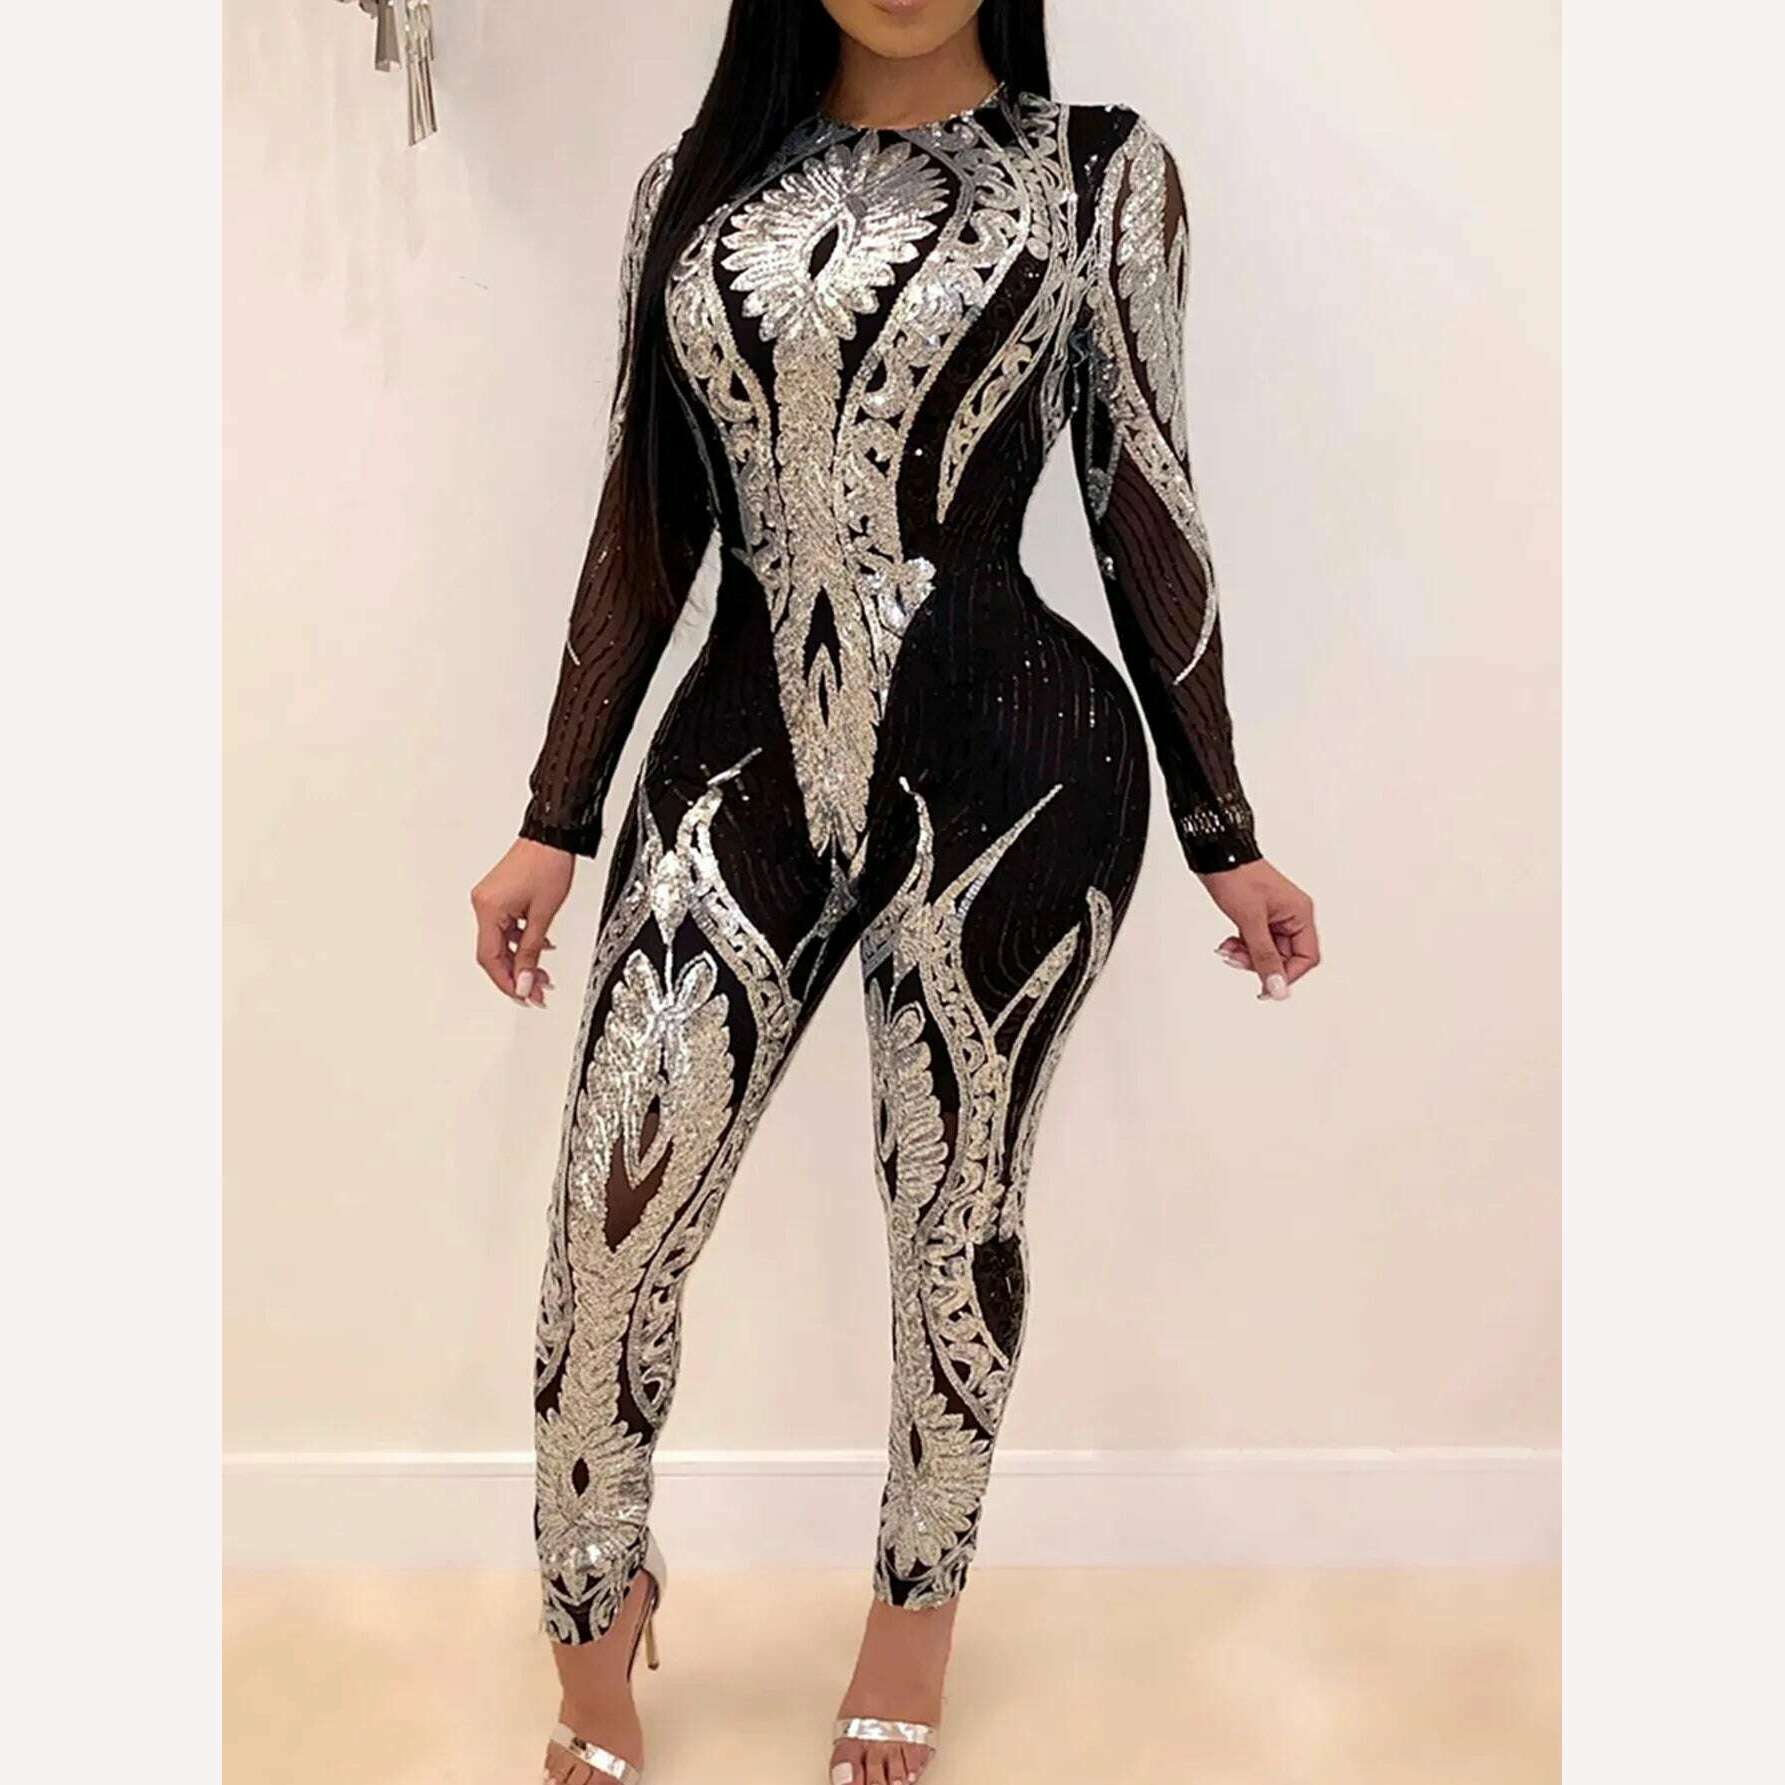 KIMLUD, Sexy Long sleeve Sequin bodycon jumpsuit women body bodysuit one piece birthday party nightclub outfits womens jumpsuits overall, Silver / S, KIMLUD Womens Clothes